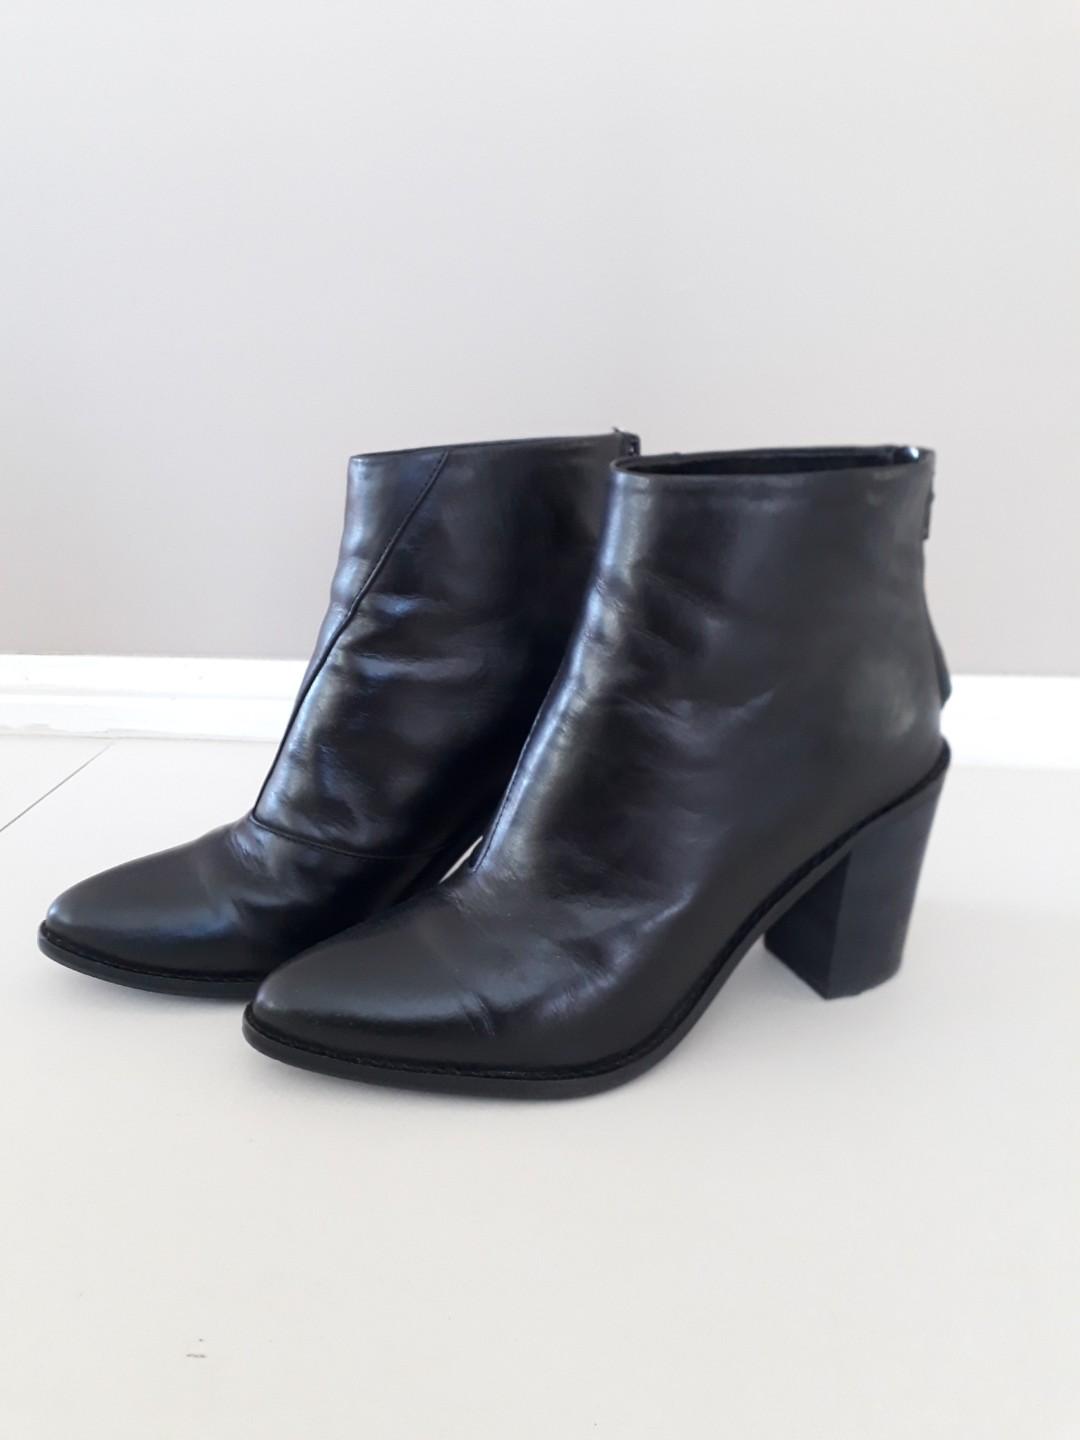 leather ankle boots size 5